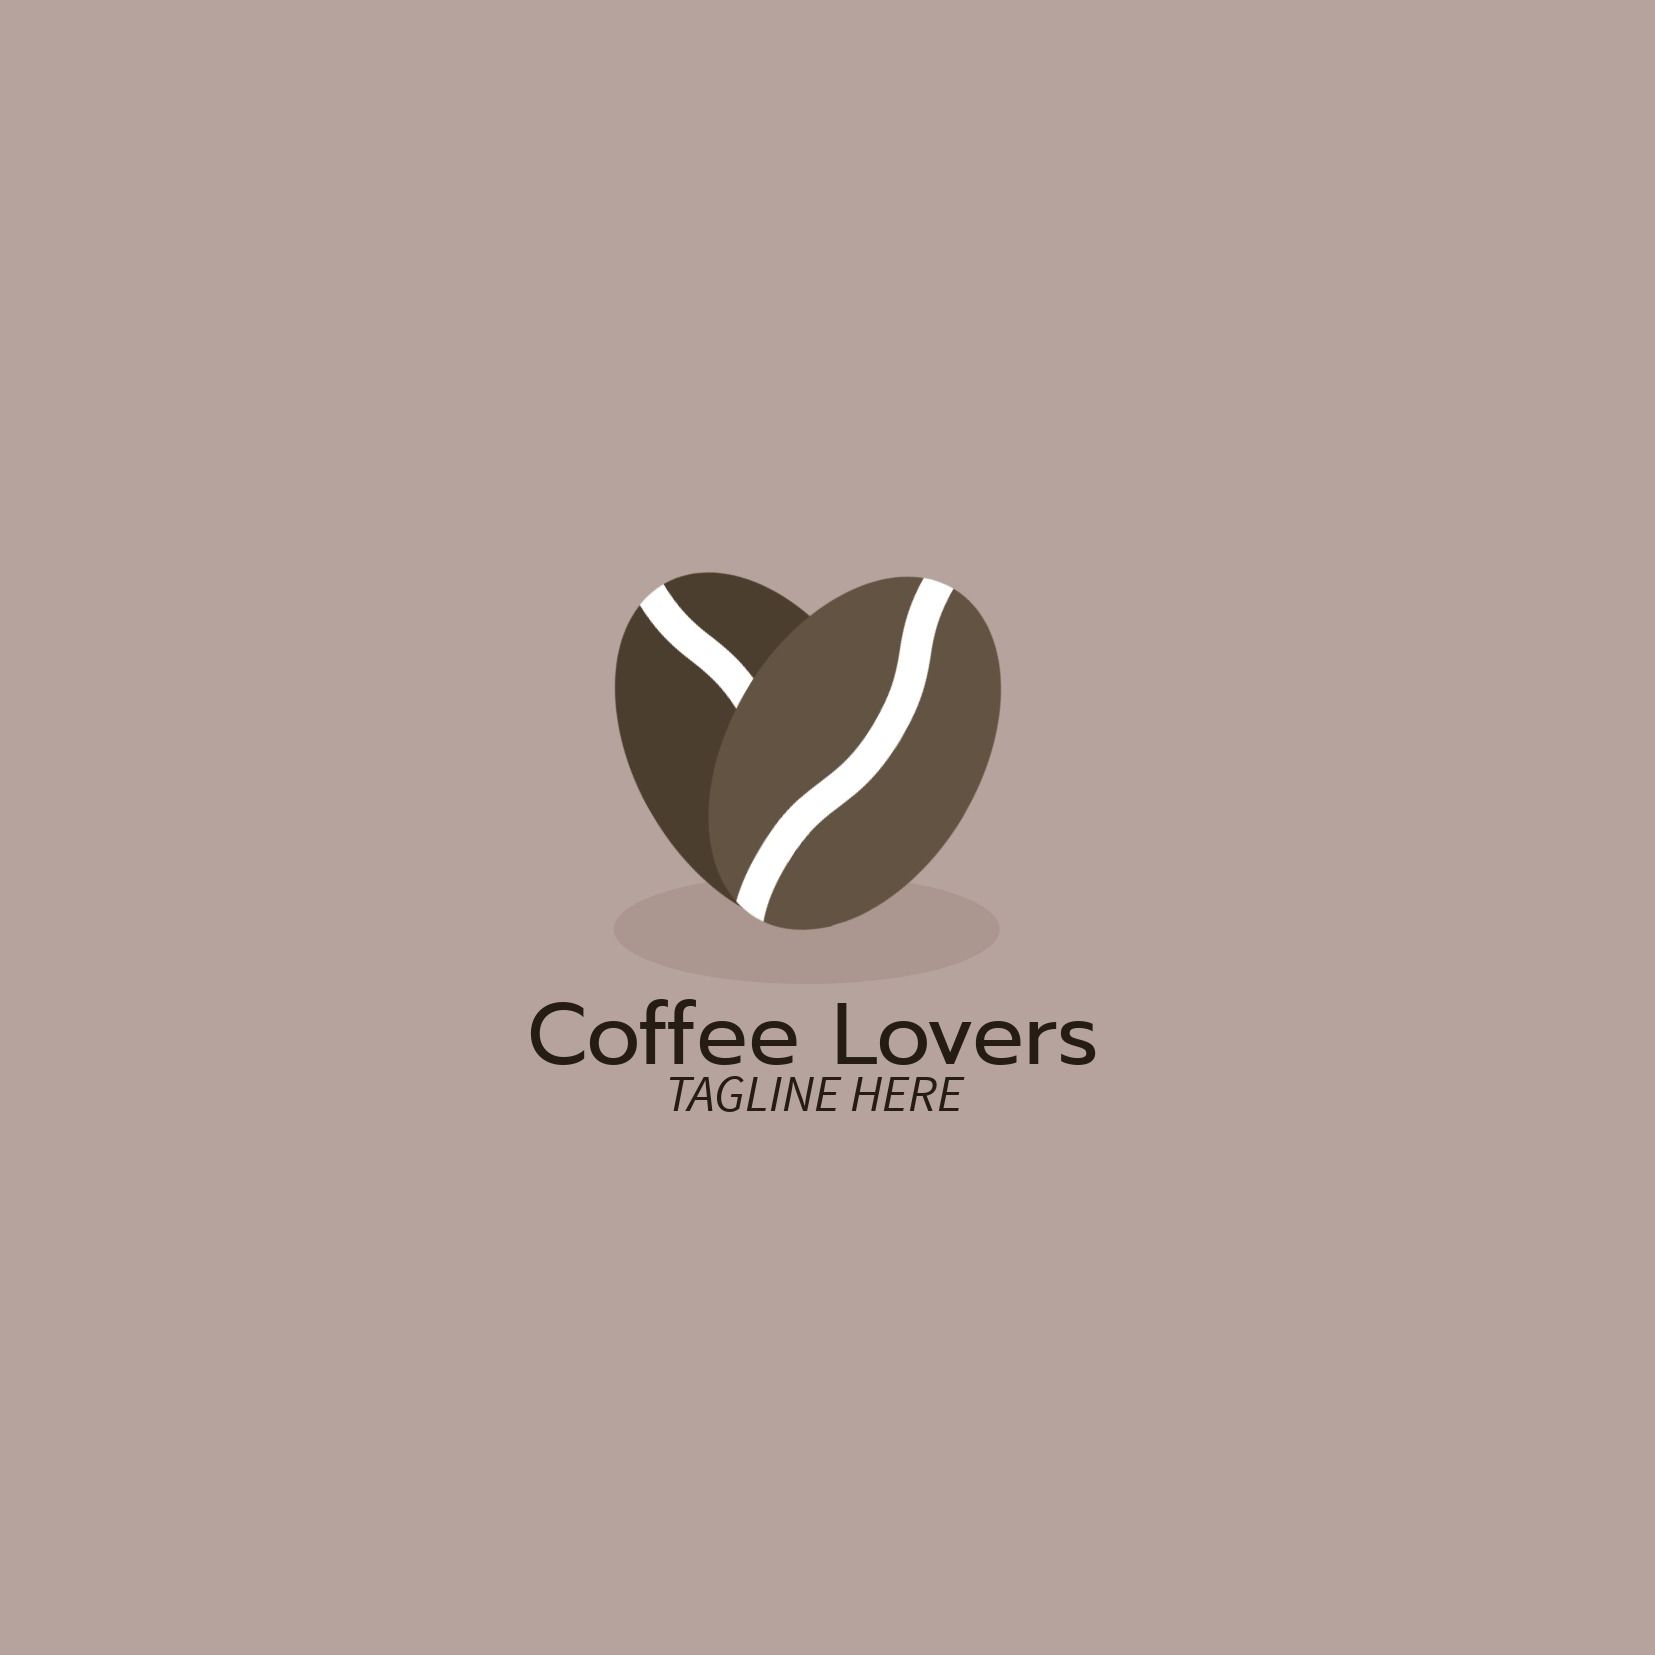 Coffee Lovers logo with coffee beans - Advantages of Prompt font - Image